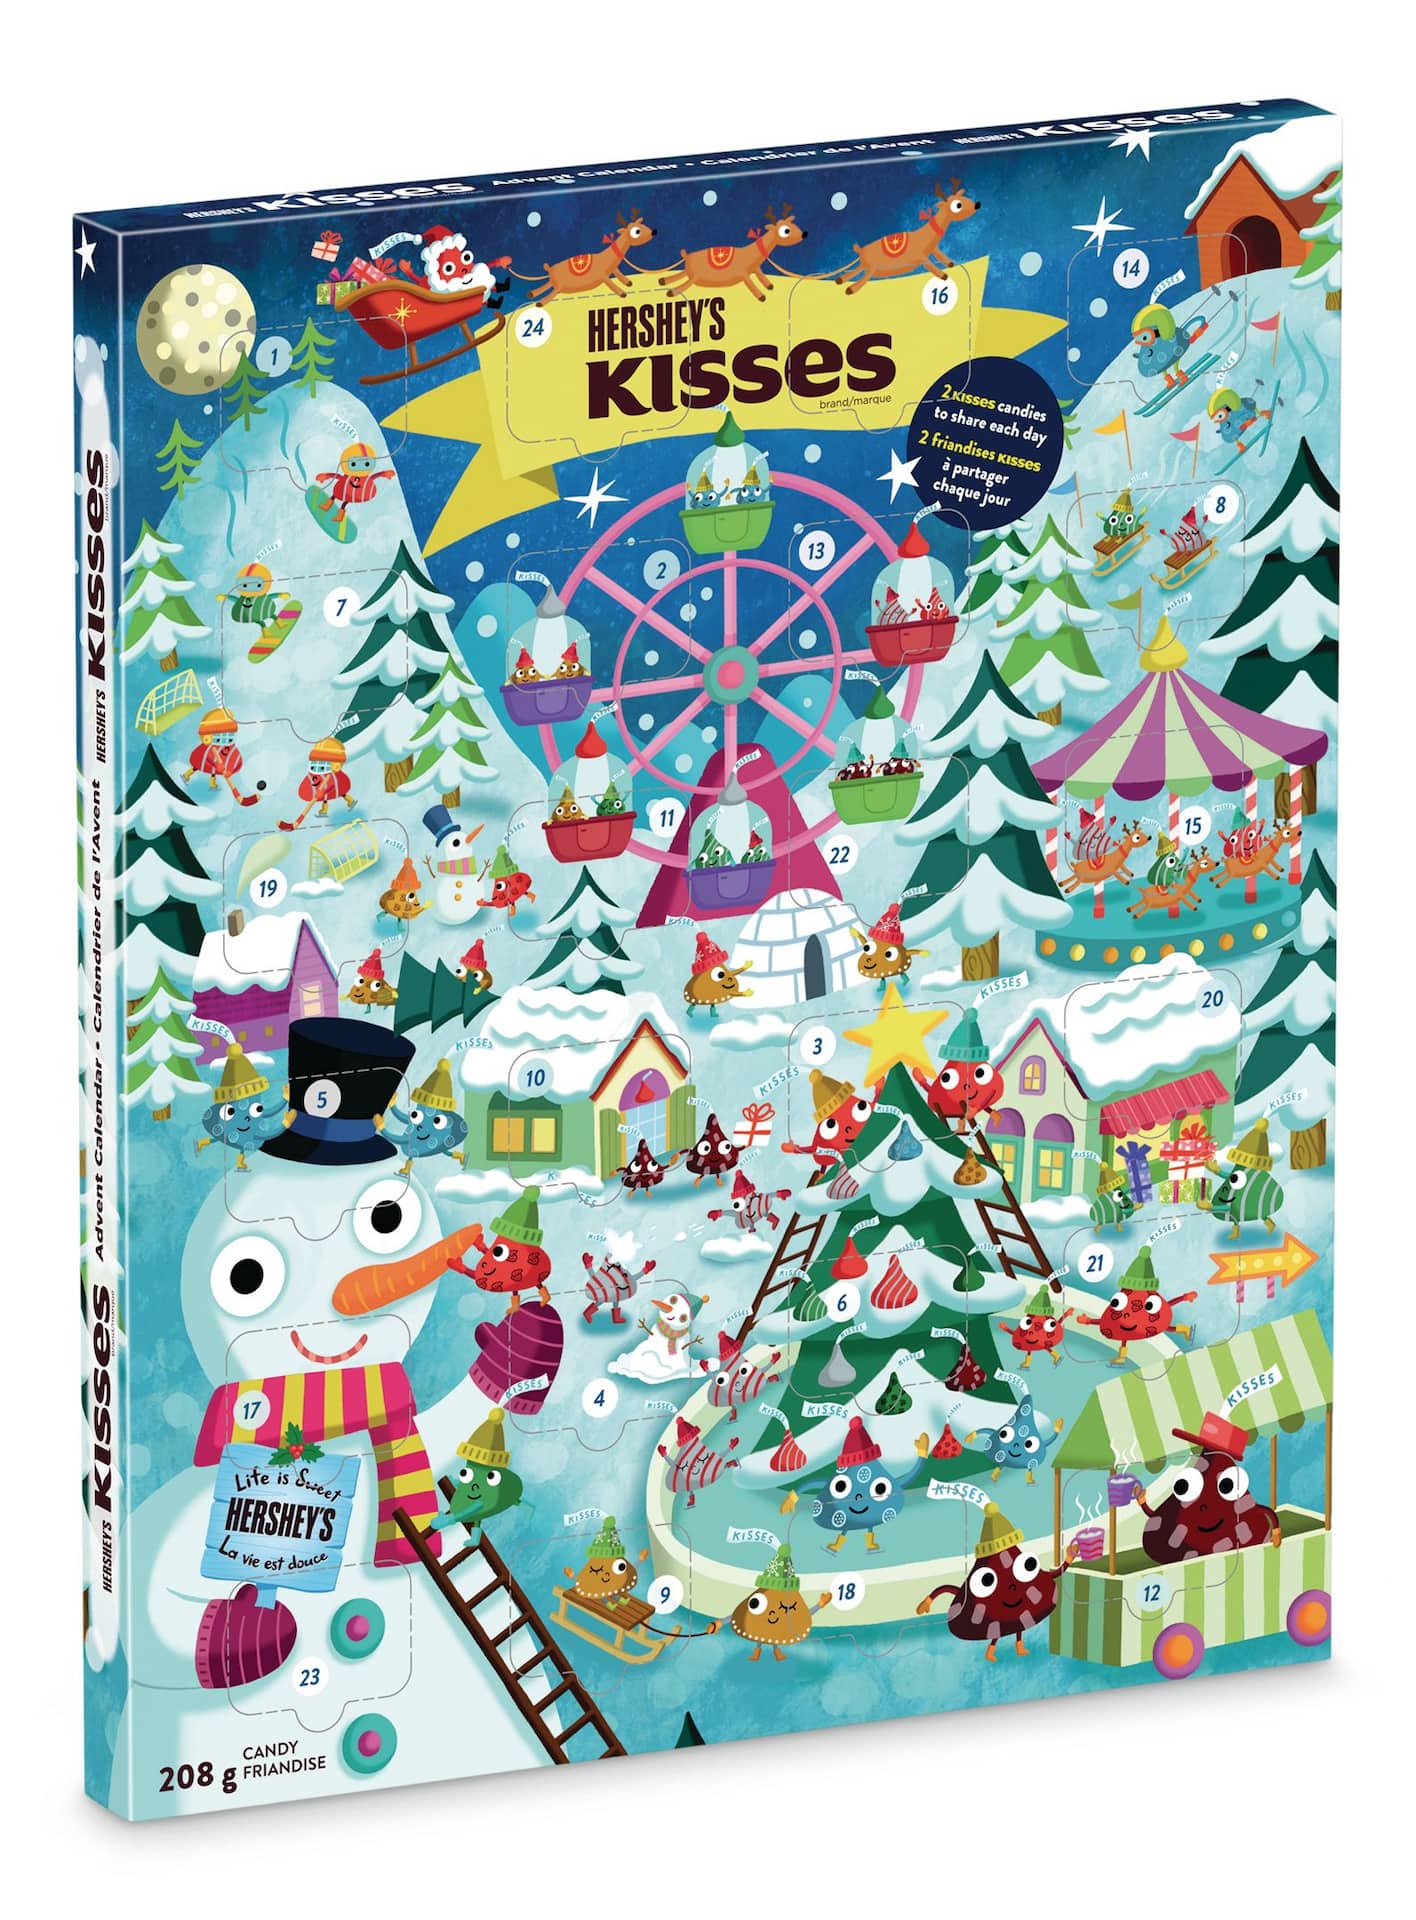 Hershey's Kisses Chocolate Holiday Advent Calendar, 208g Canadian Tire